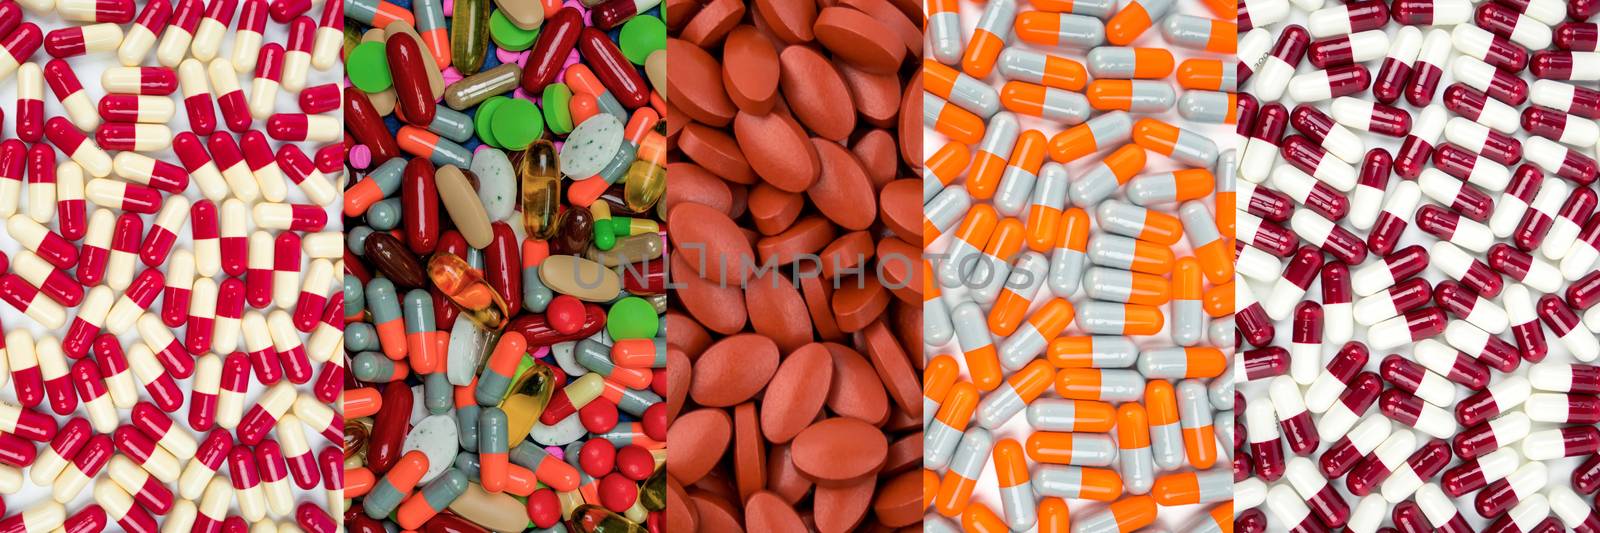 Vitamins and supplements. Colorful of pills. Many of capsules and tablets pills. Pharmaceutical industry products. Drug interactions concept. Pharmacology and toxicology. Pharmaceutics concept. 